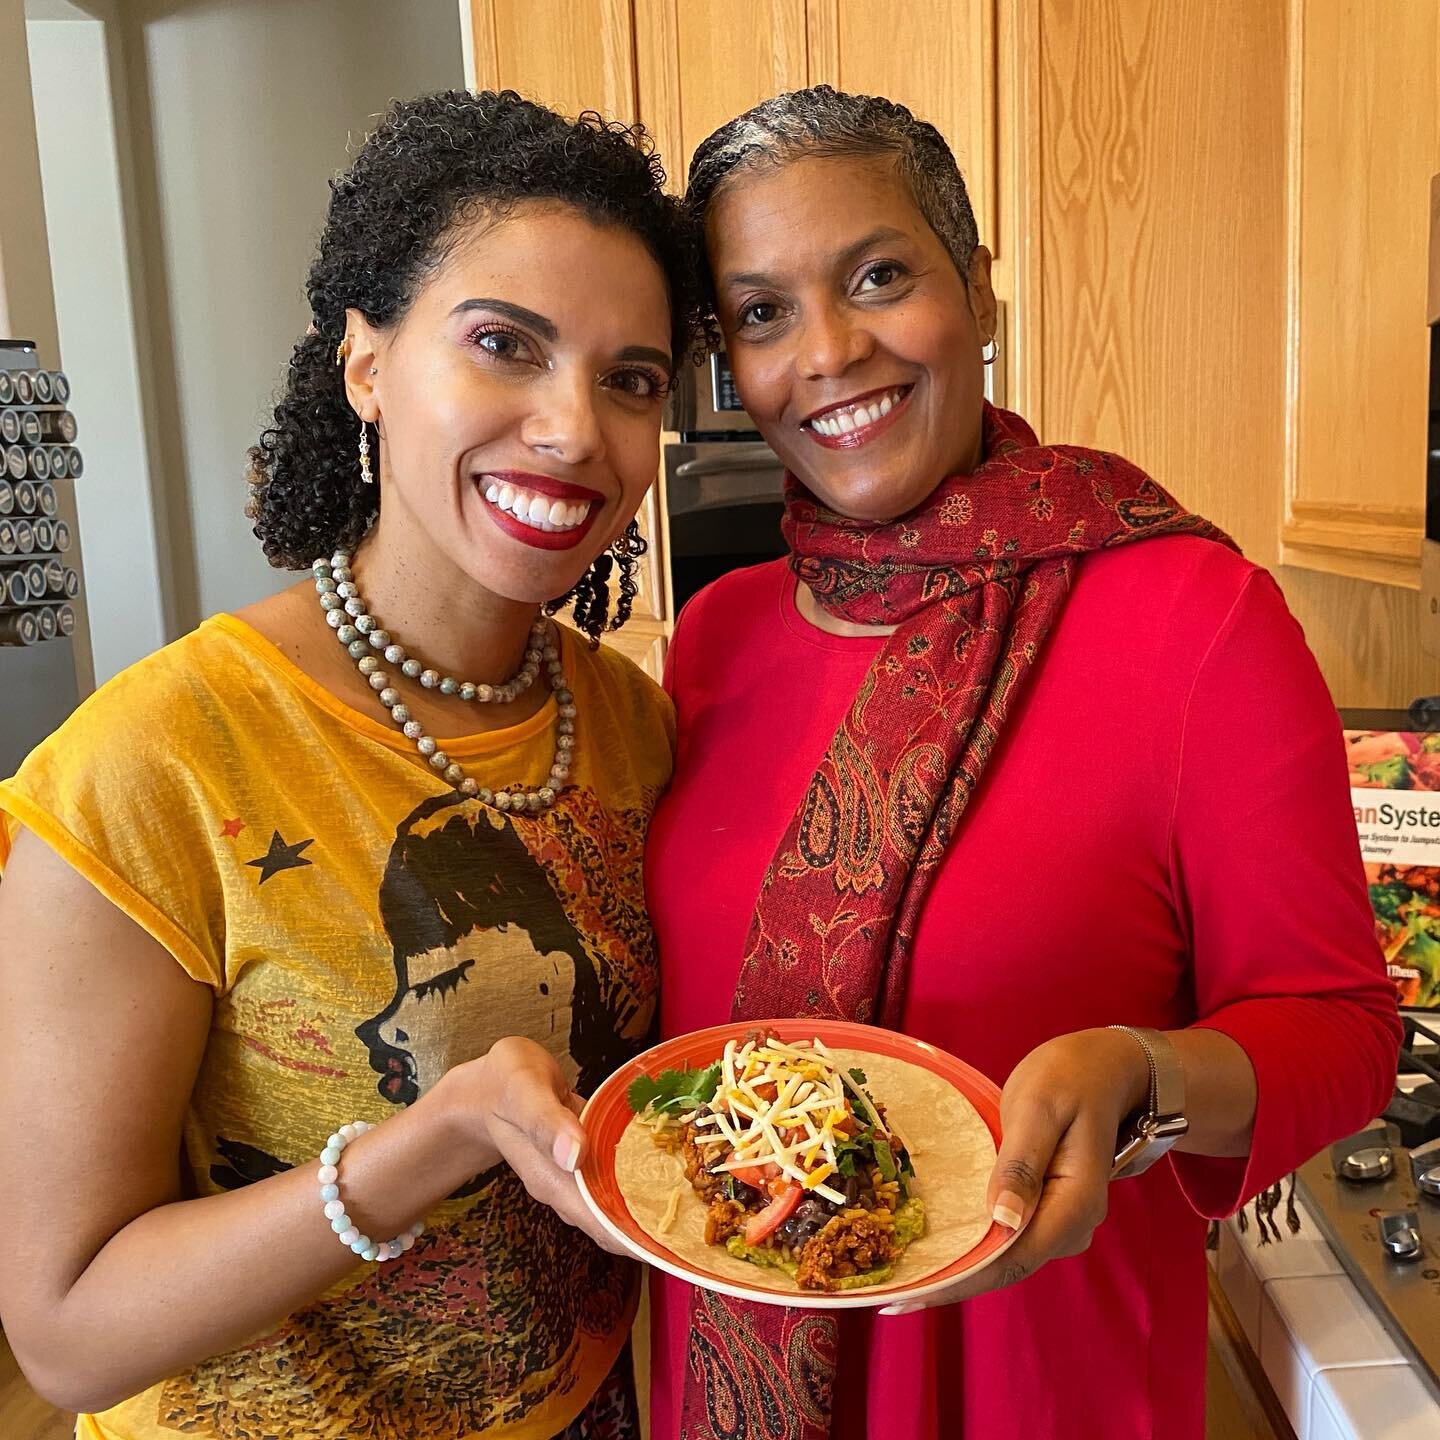 🌱
Happy @MeatlessMonday Veggie Soul Food Fam! 💖 Mom and I had so much fun making these soft tacos. We used the taco recipe in our cookbook as inspiration and then improved! We do that a lot. 🤣 The full recipe is on our YouTube channel and Mom incl